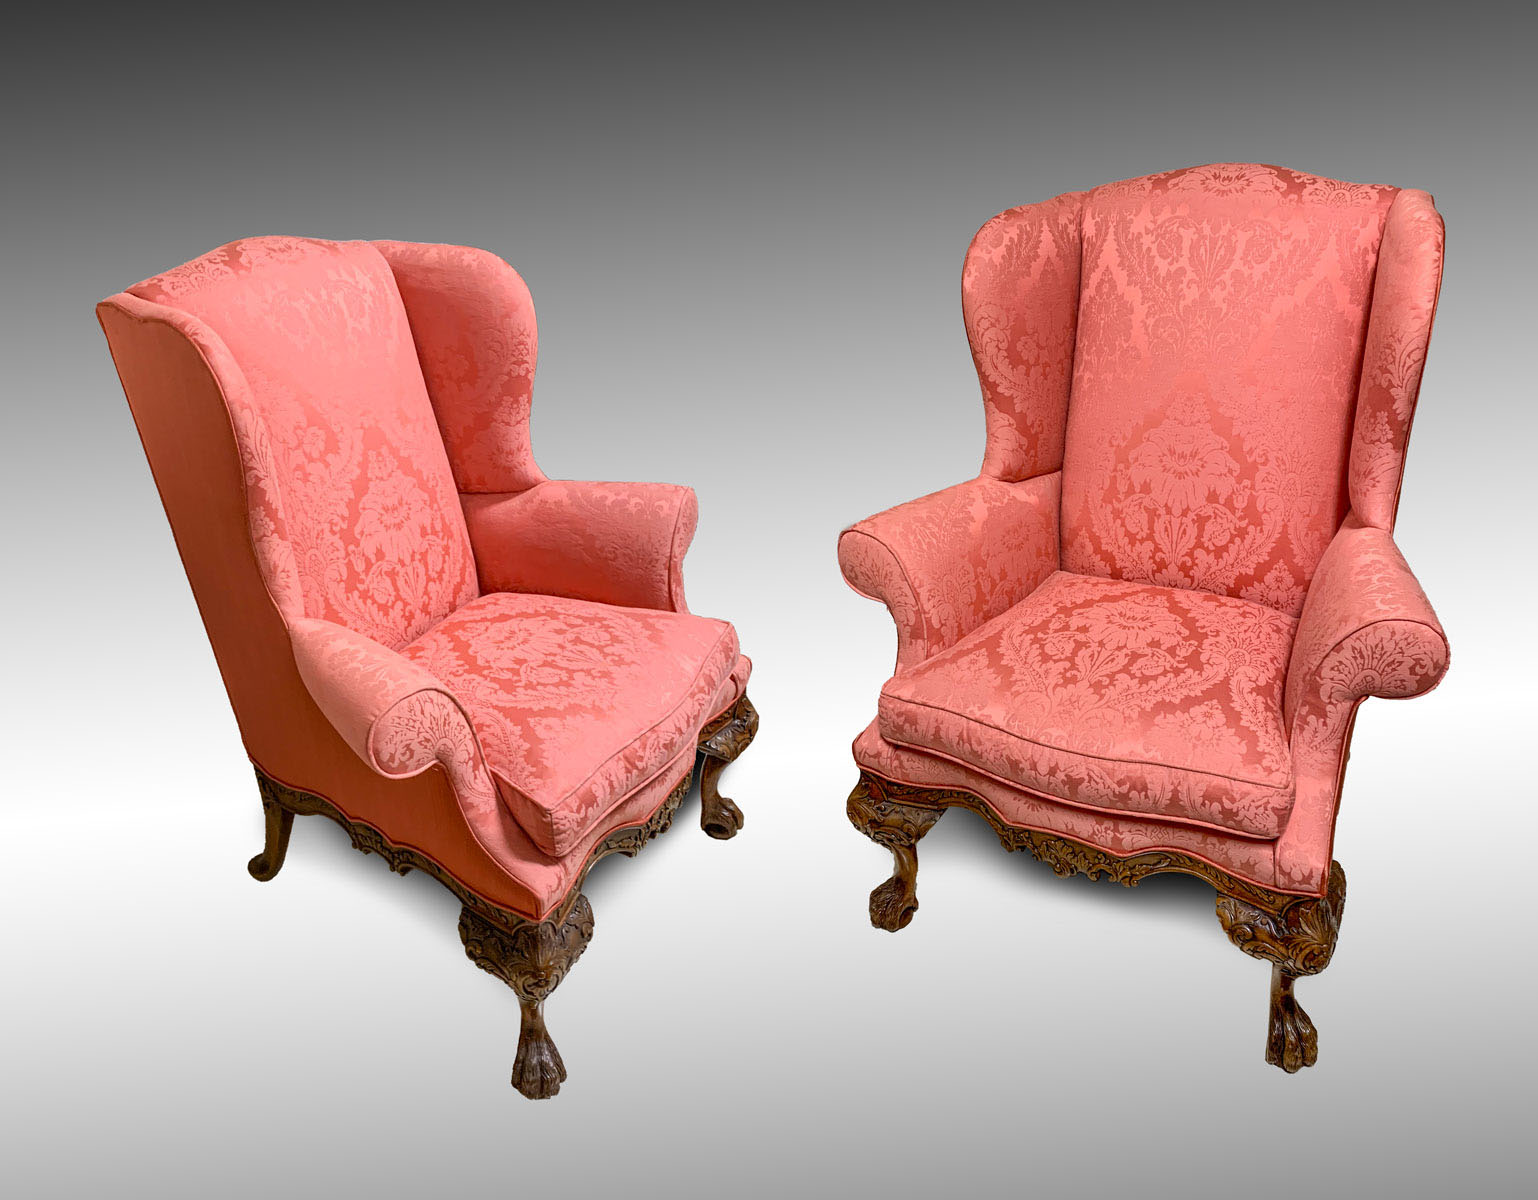 PR HIGHLY CARVED WINGBACK CHAIRS: